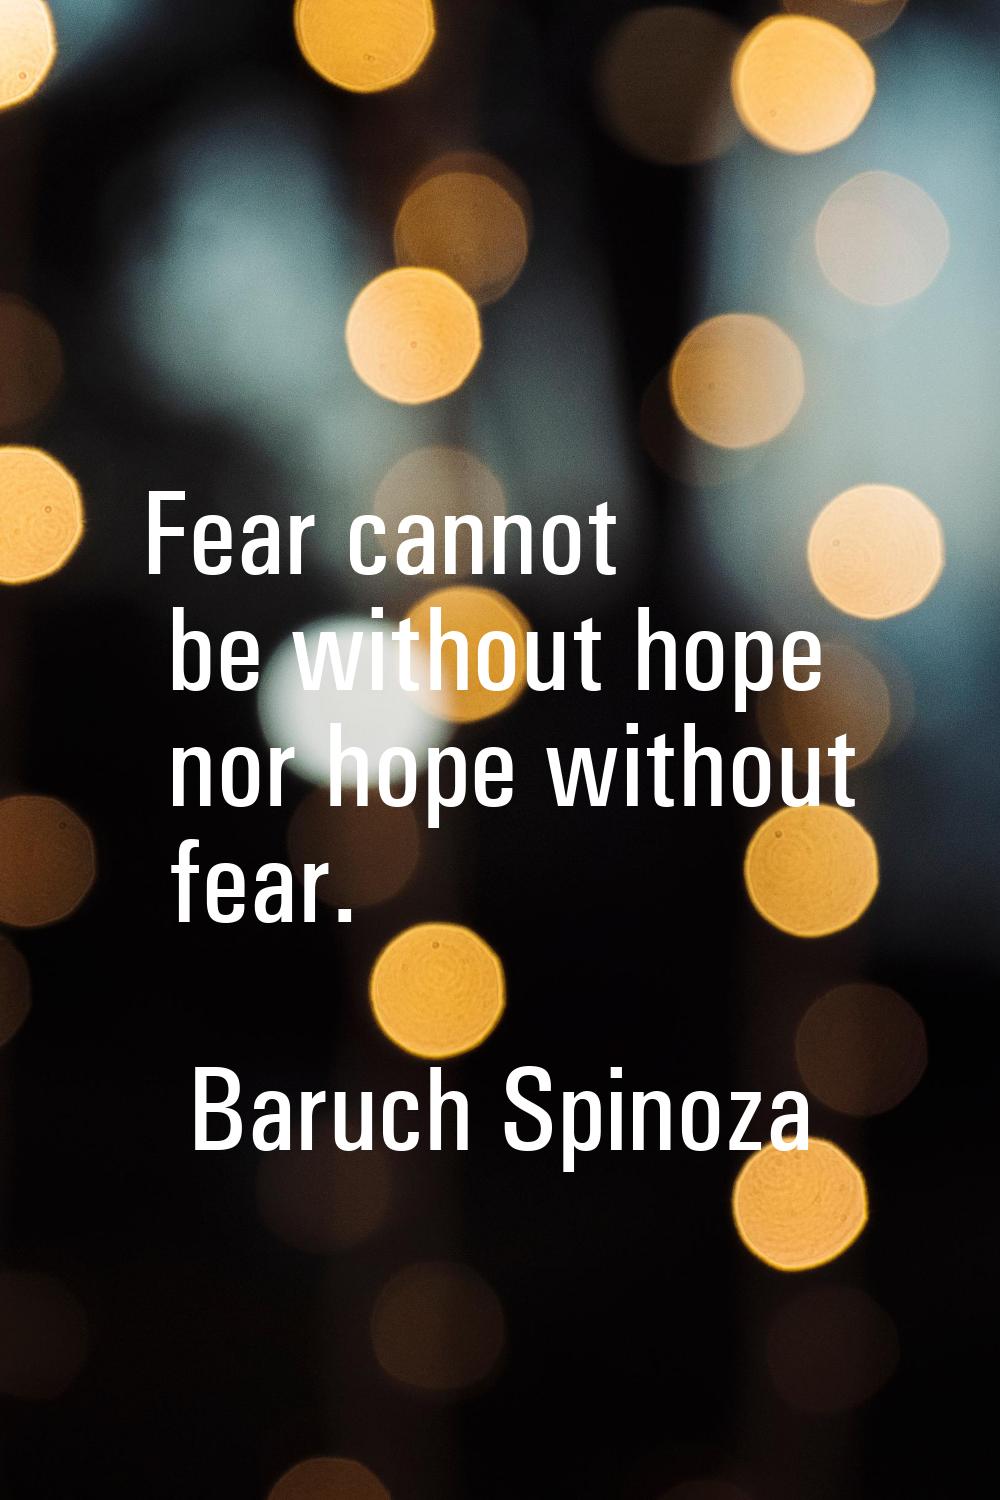 Fear cannot be without hope nor hope without fear.